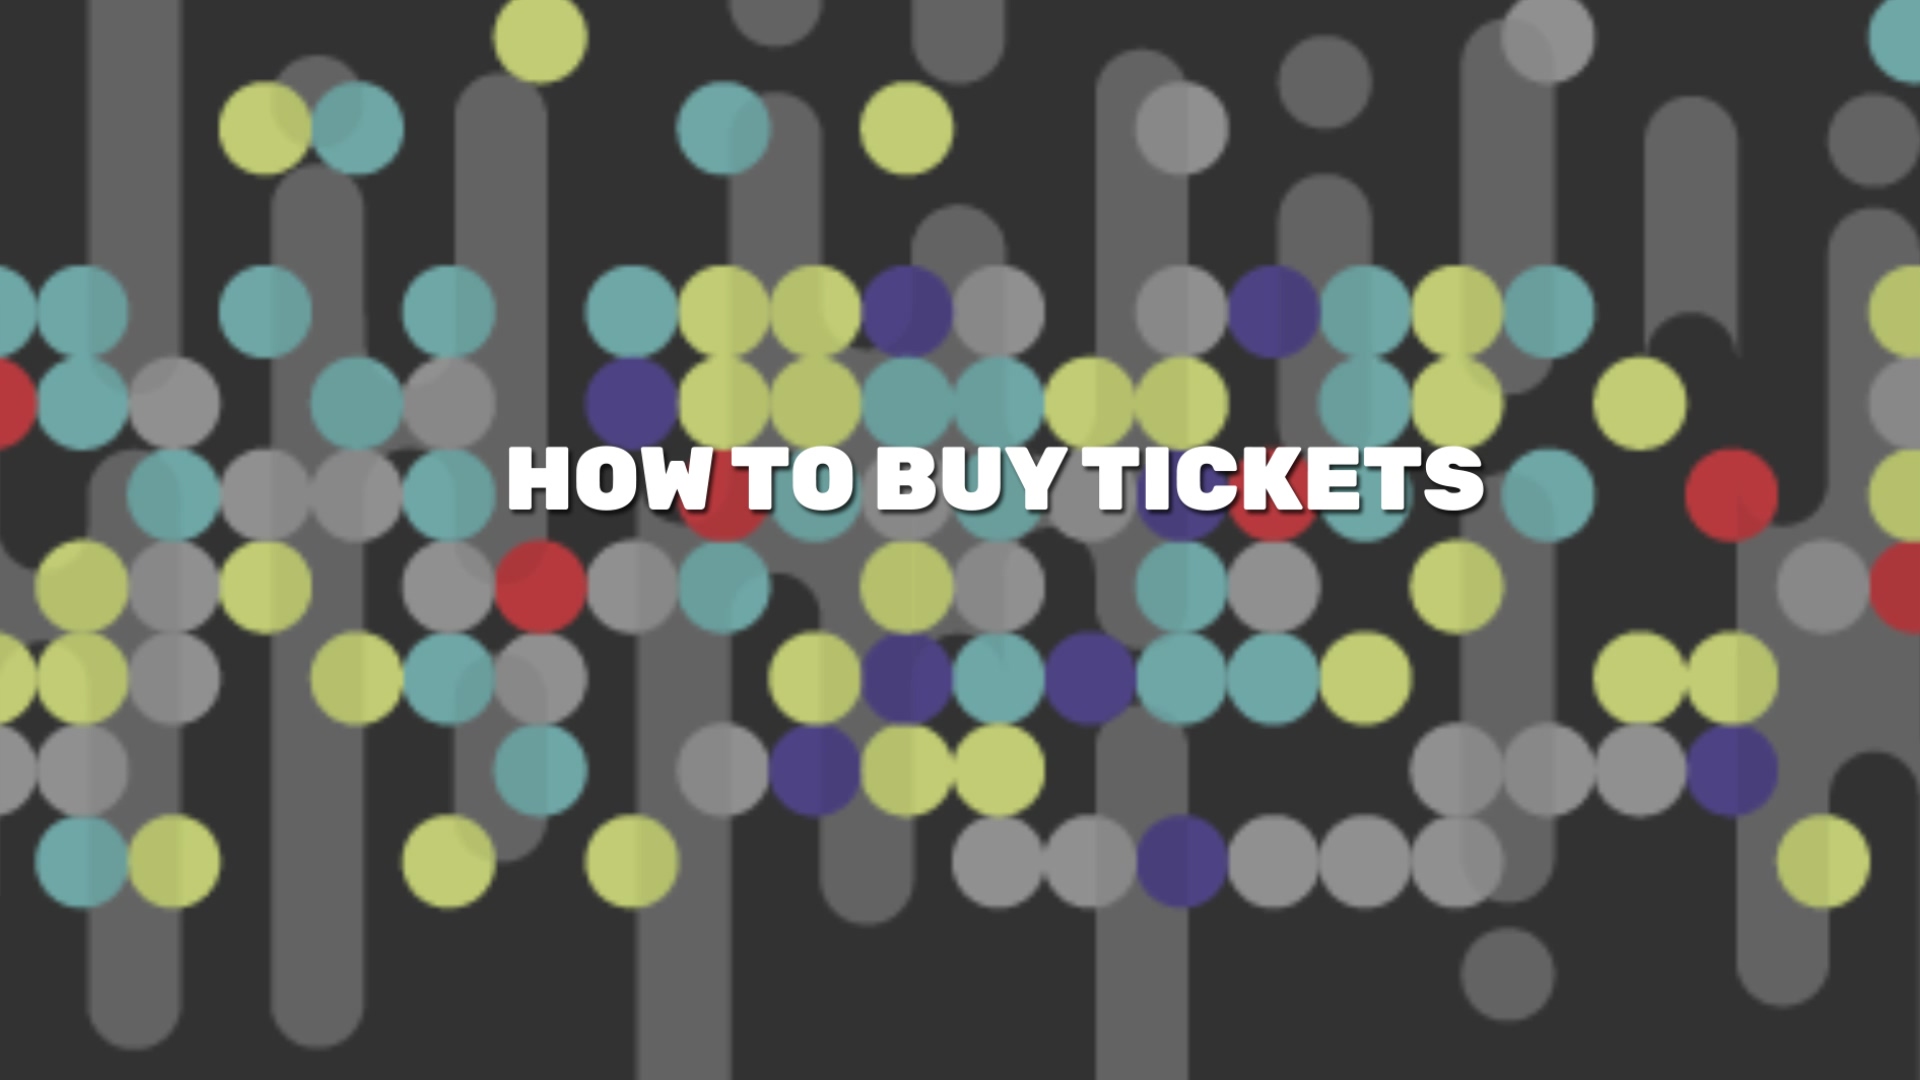 How To Buy Tickets